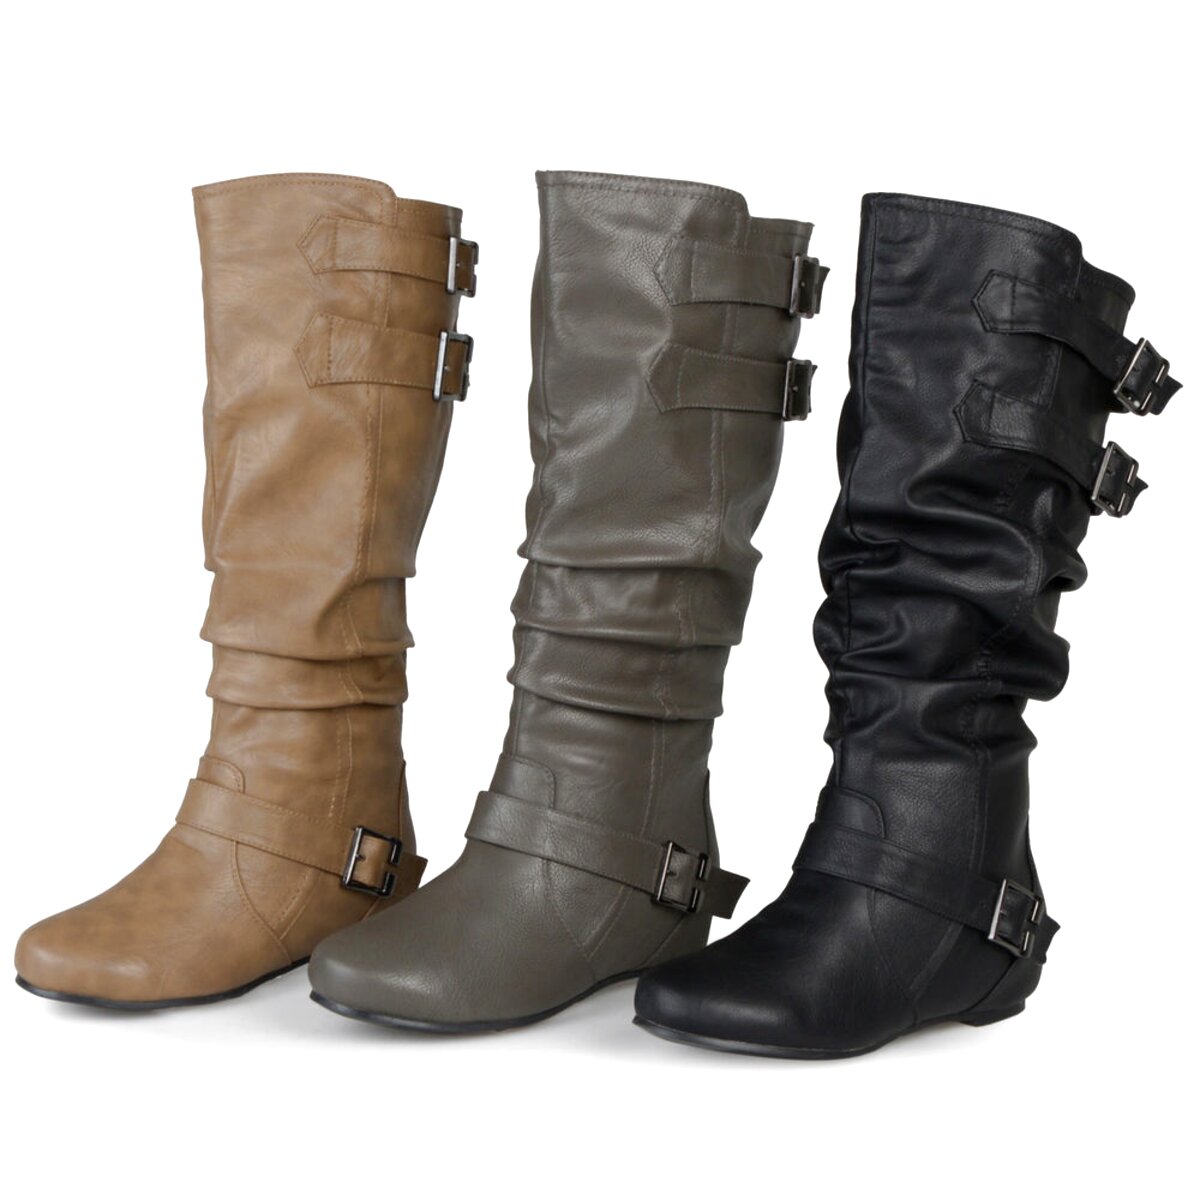 Wide Calf Slouch Boots for sale in UK | 56 used Wide Calf Slouch Boots